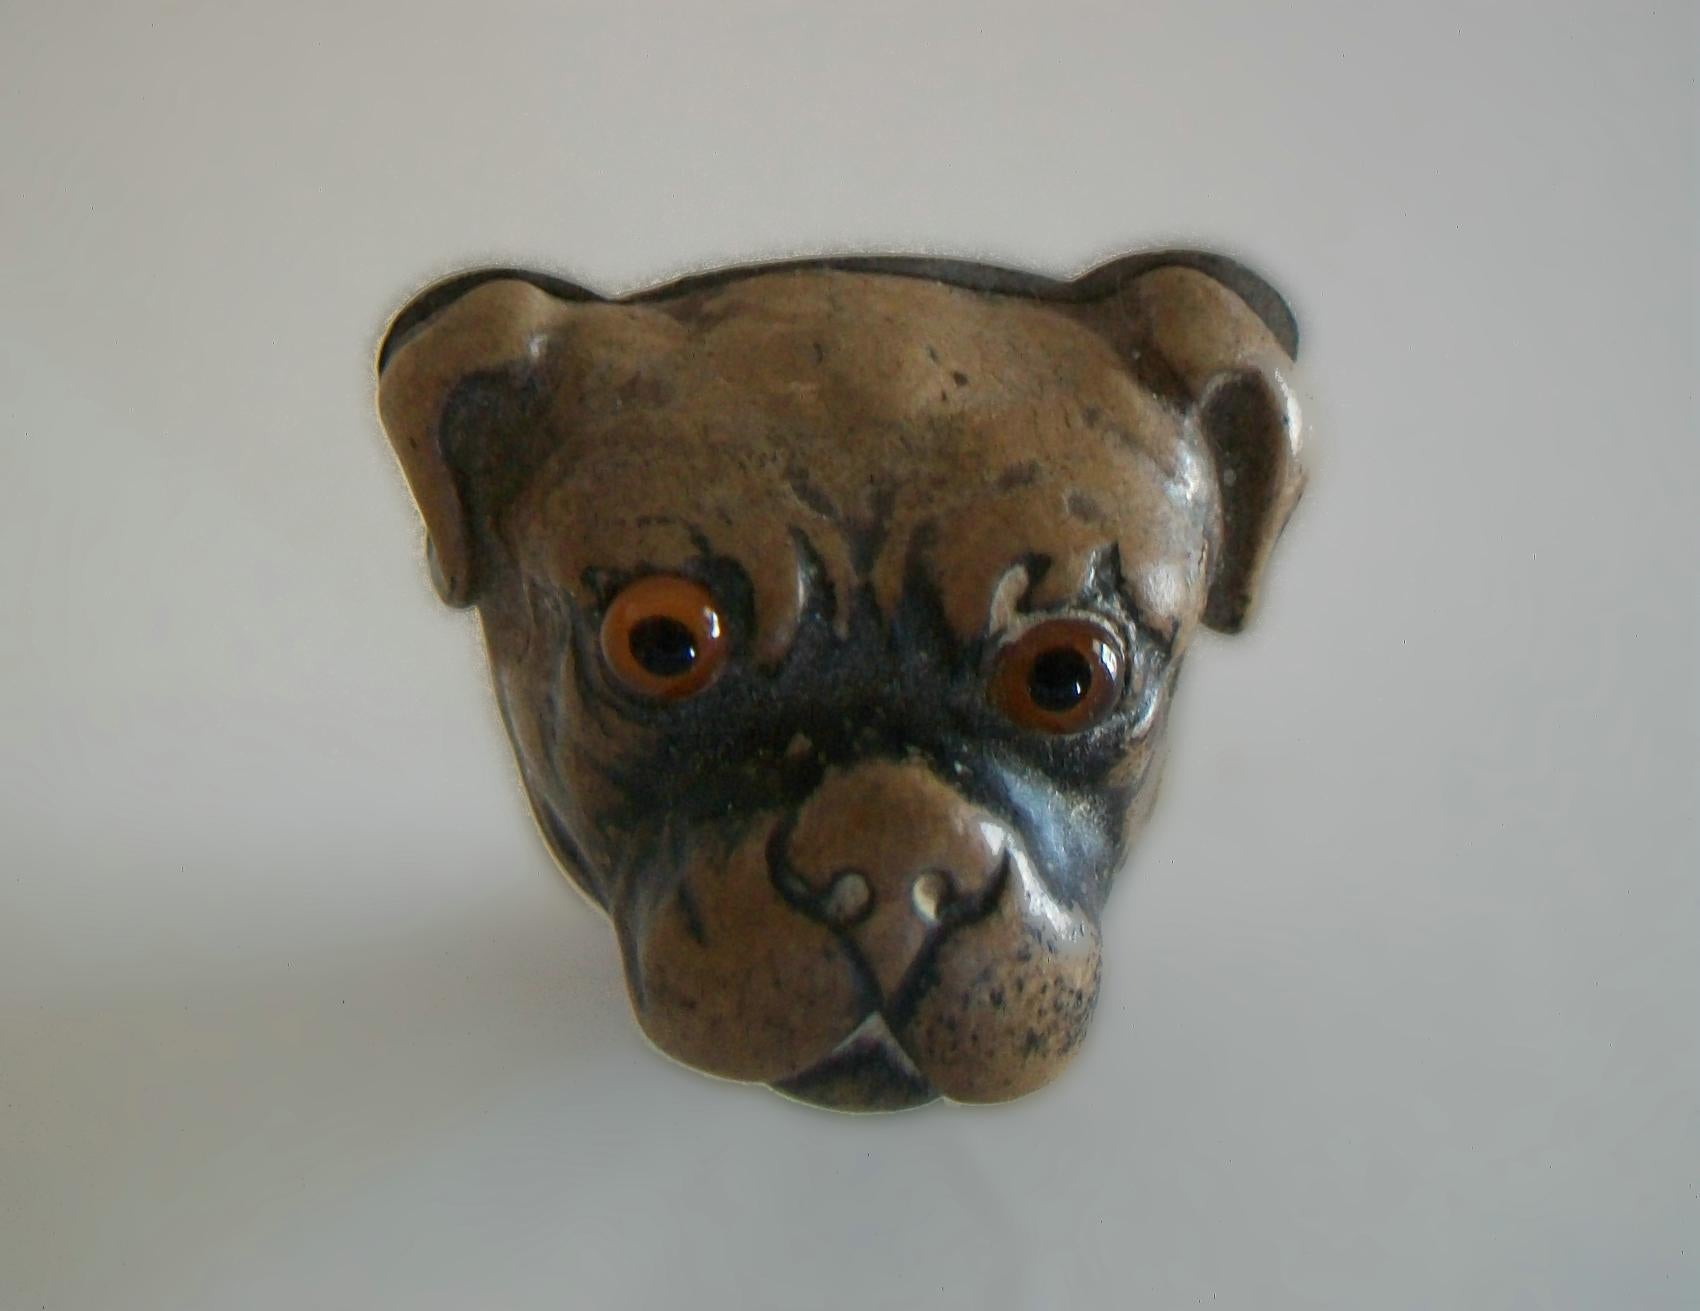 Vintage Glazed Ceramic 'Bull Dog' Brooch/Pin - Glass Eyes - Early 20th Century In Good Condition For Sale In Chatham, CA